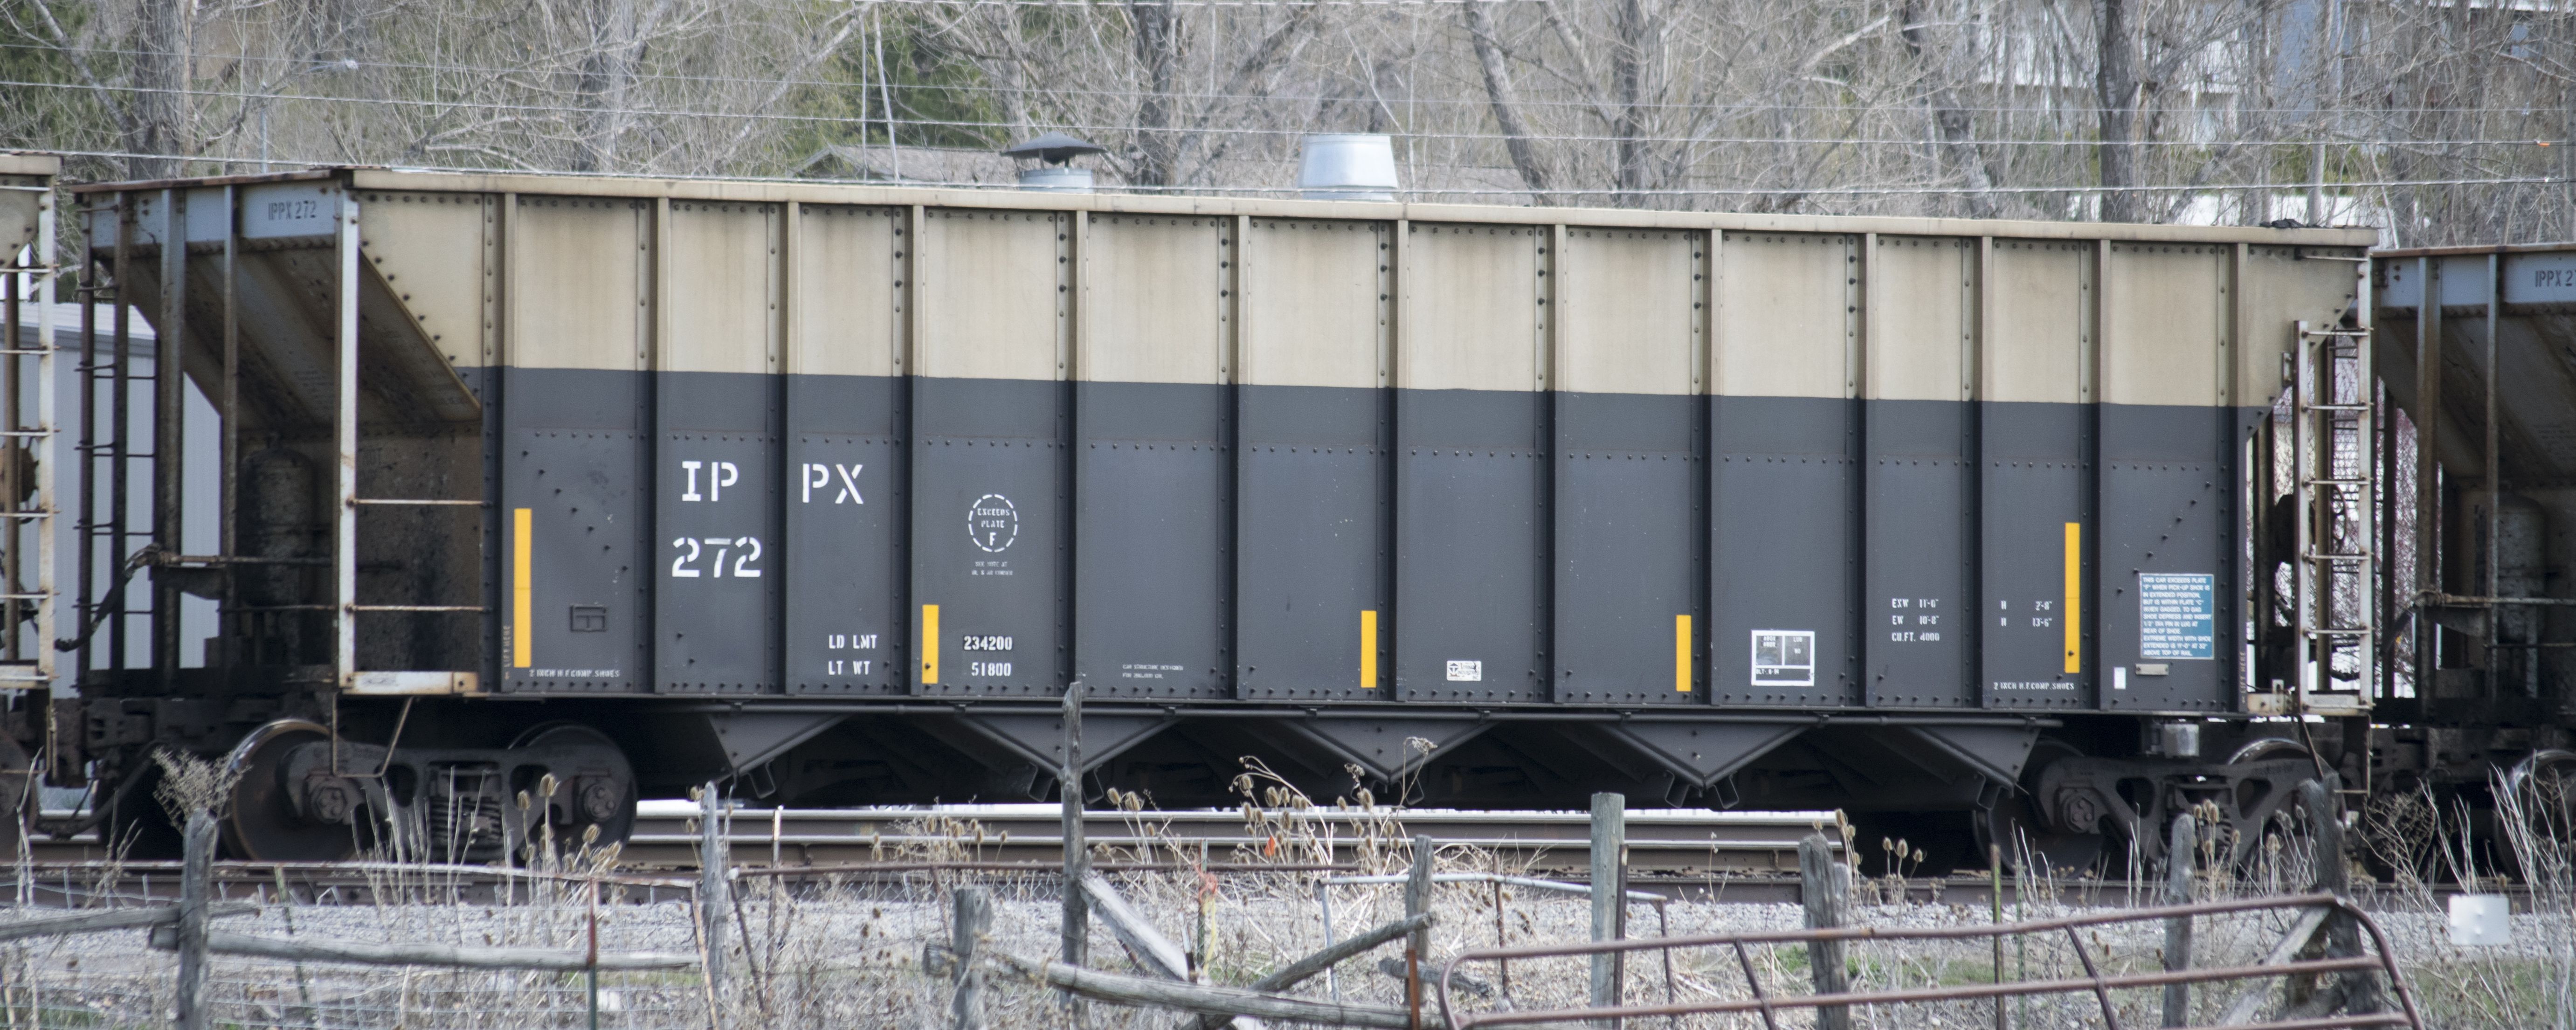 IPPX replacement cars 259-273